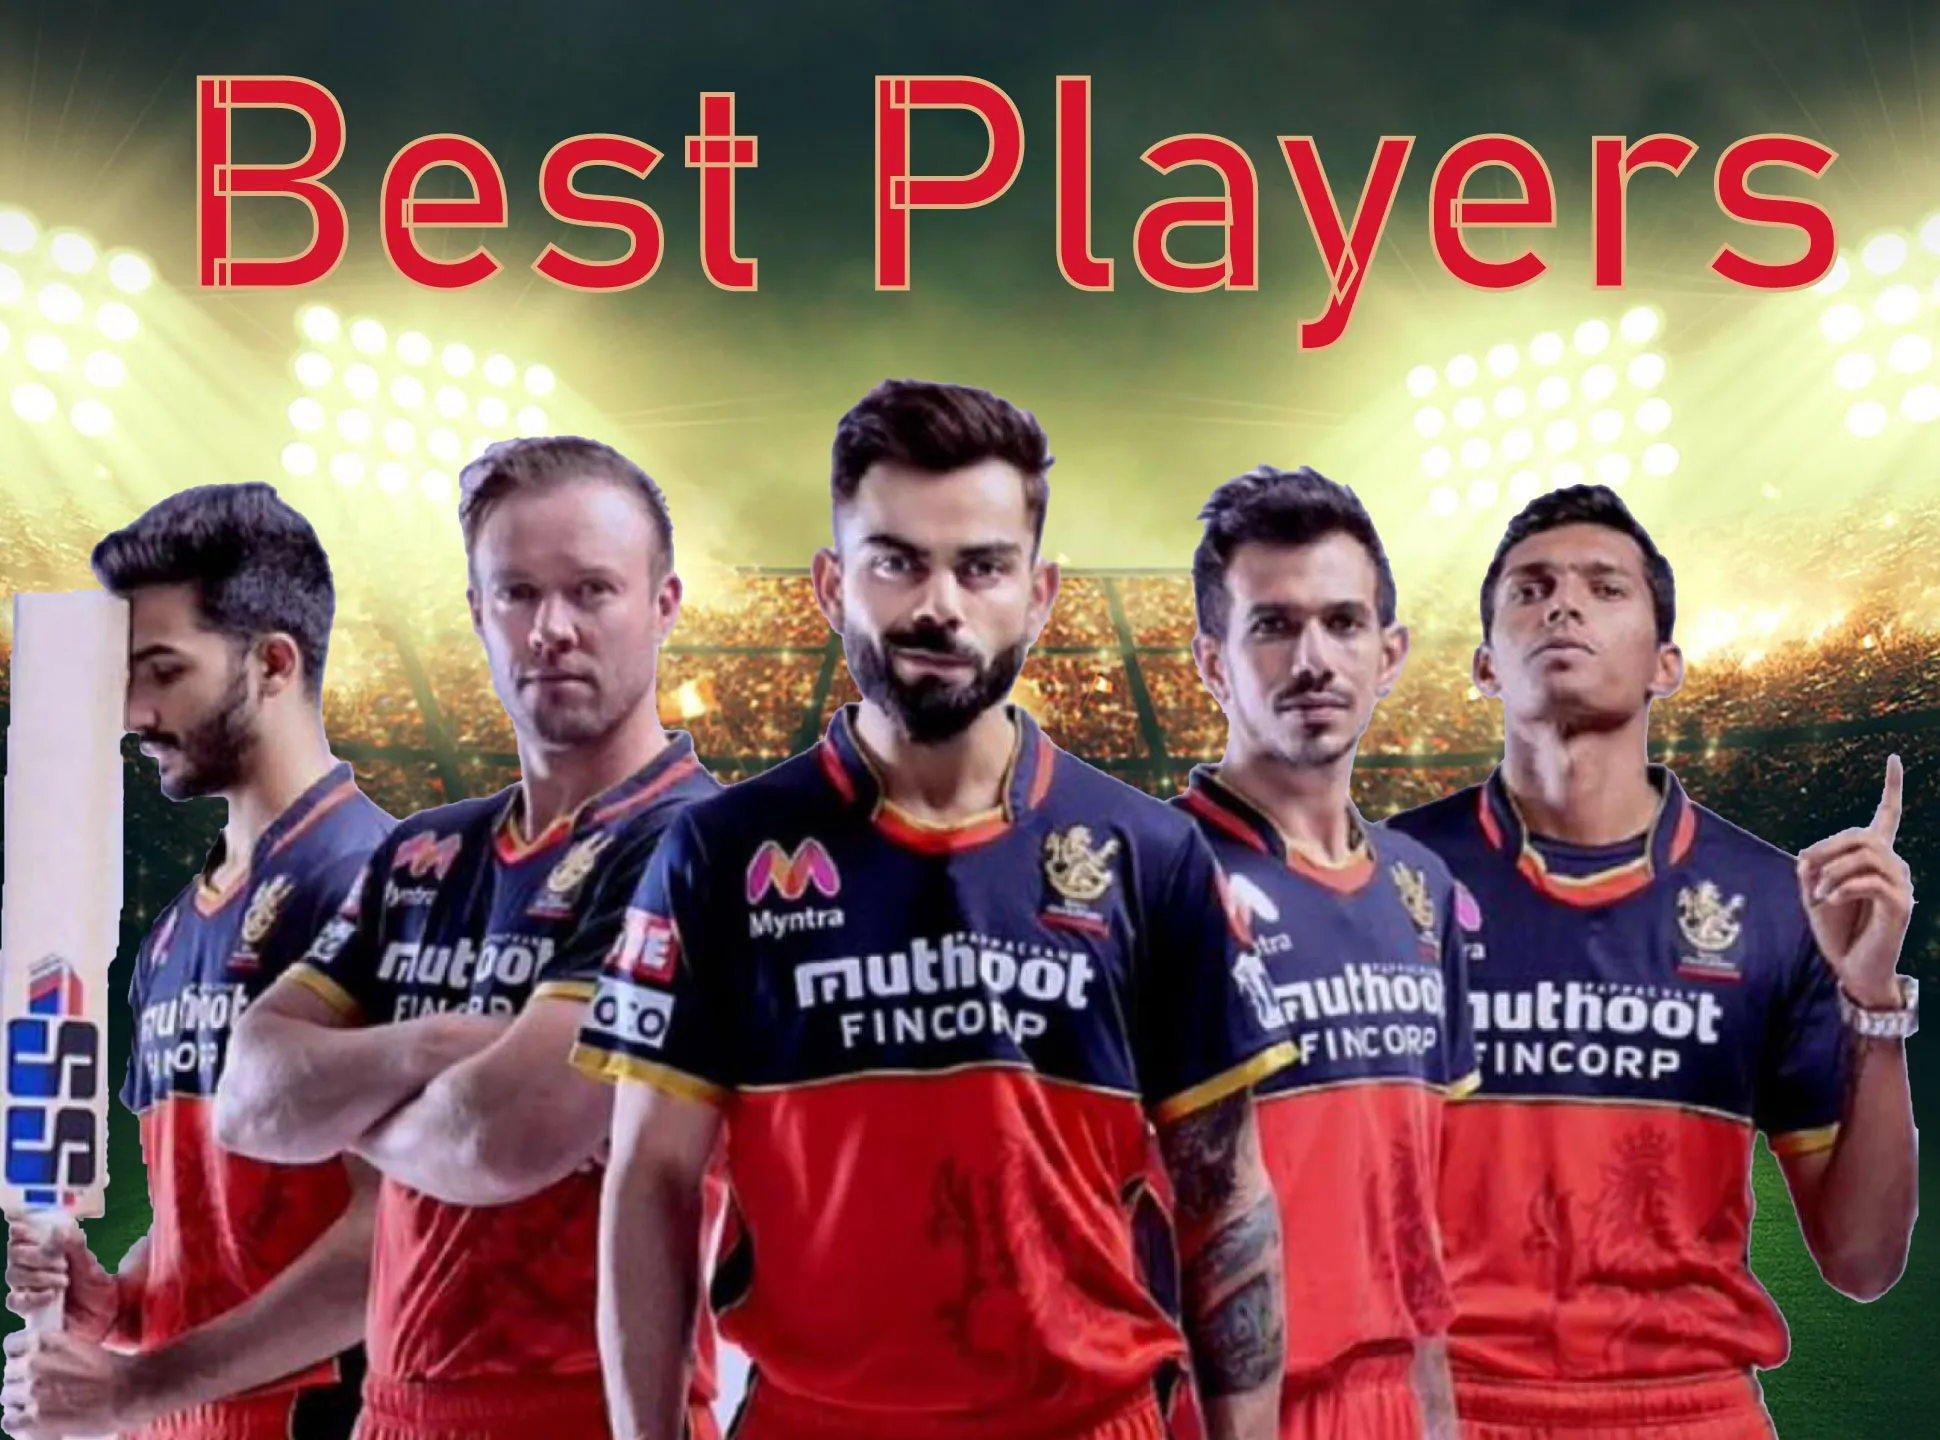 Pay attention to these players as they may become match winner or top bowlers.